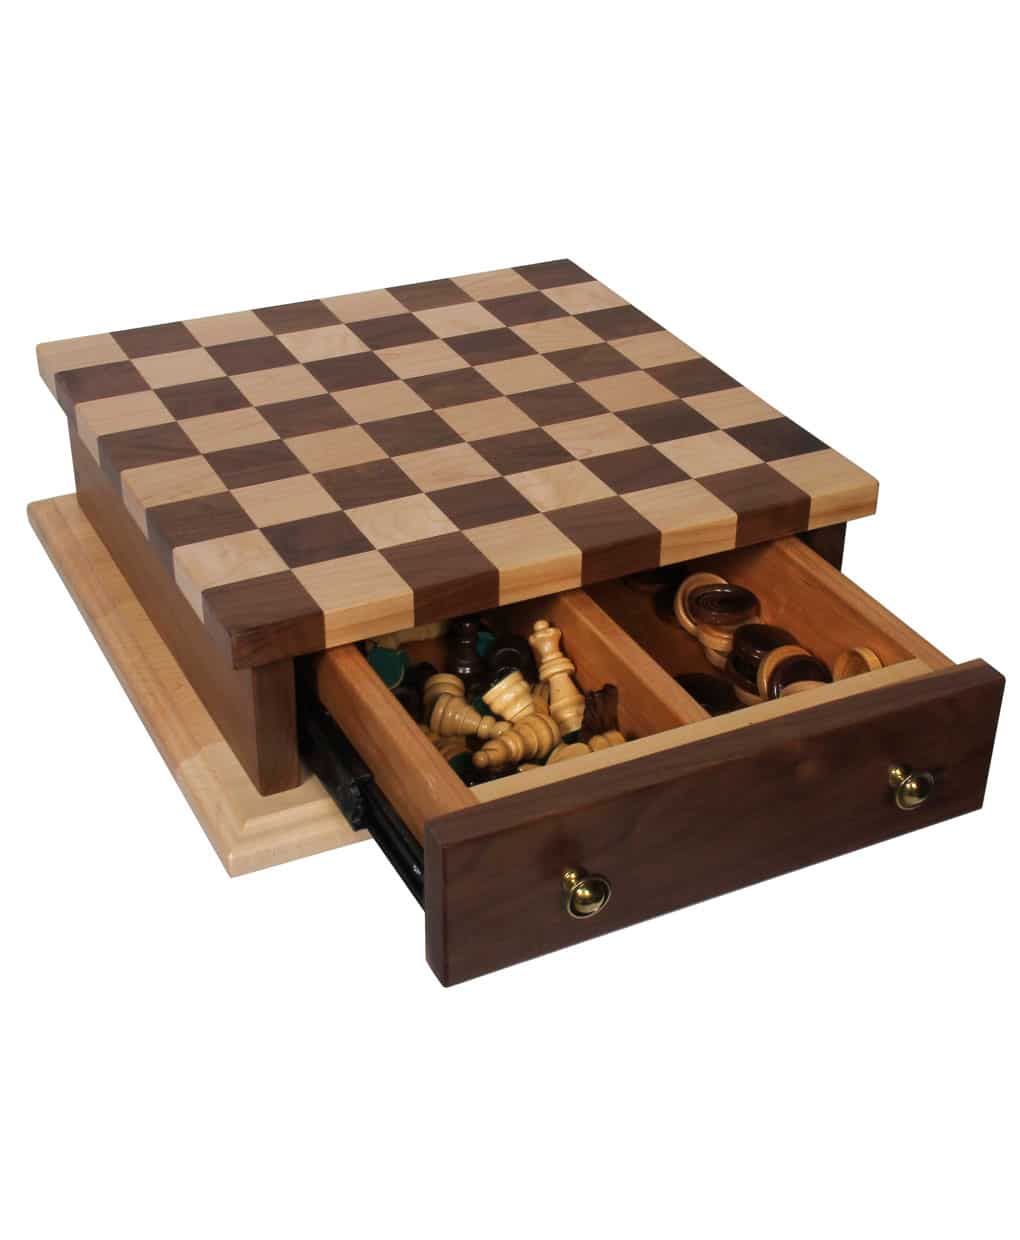 Chess And Checkerboard Set Amish, Wooden Checkers Set With Storage